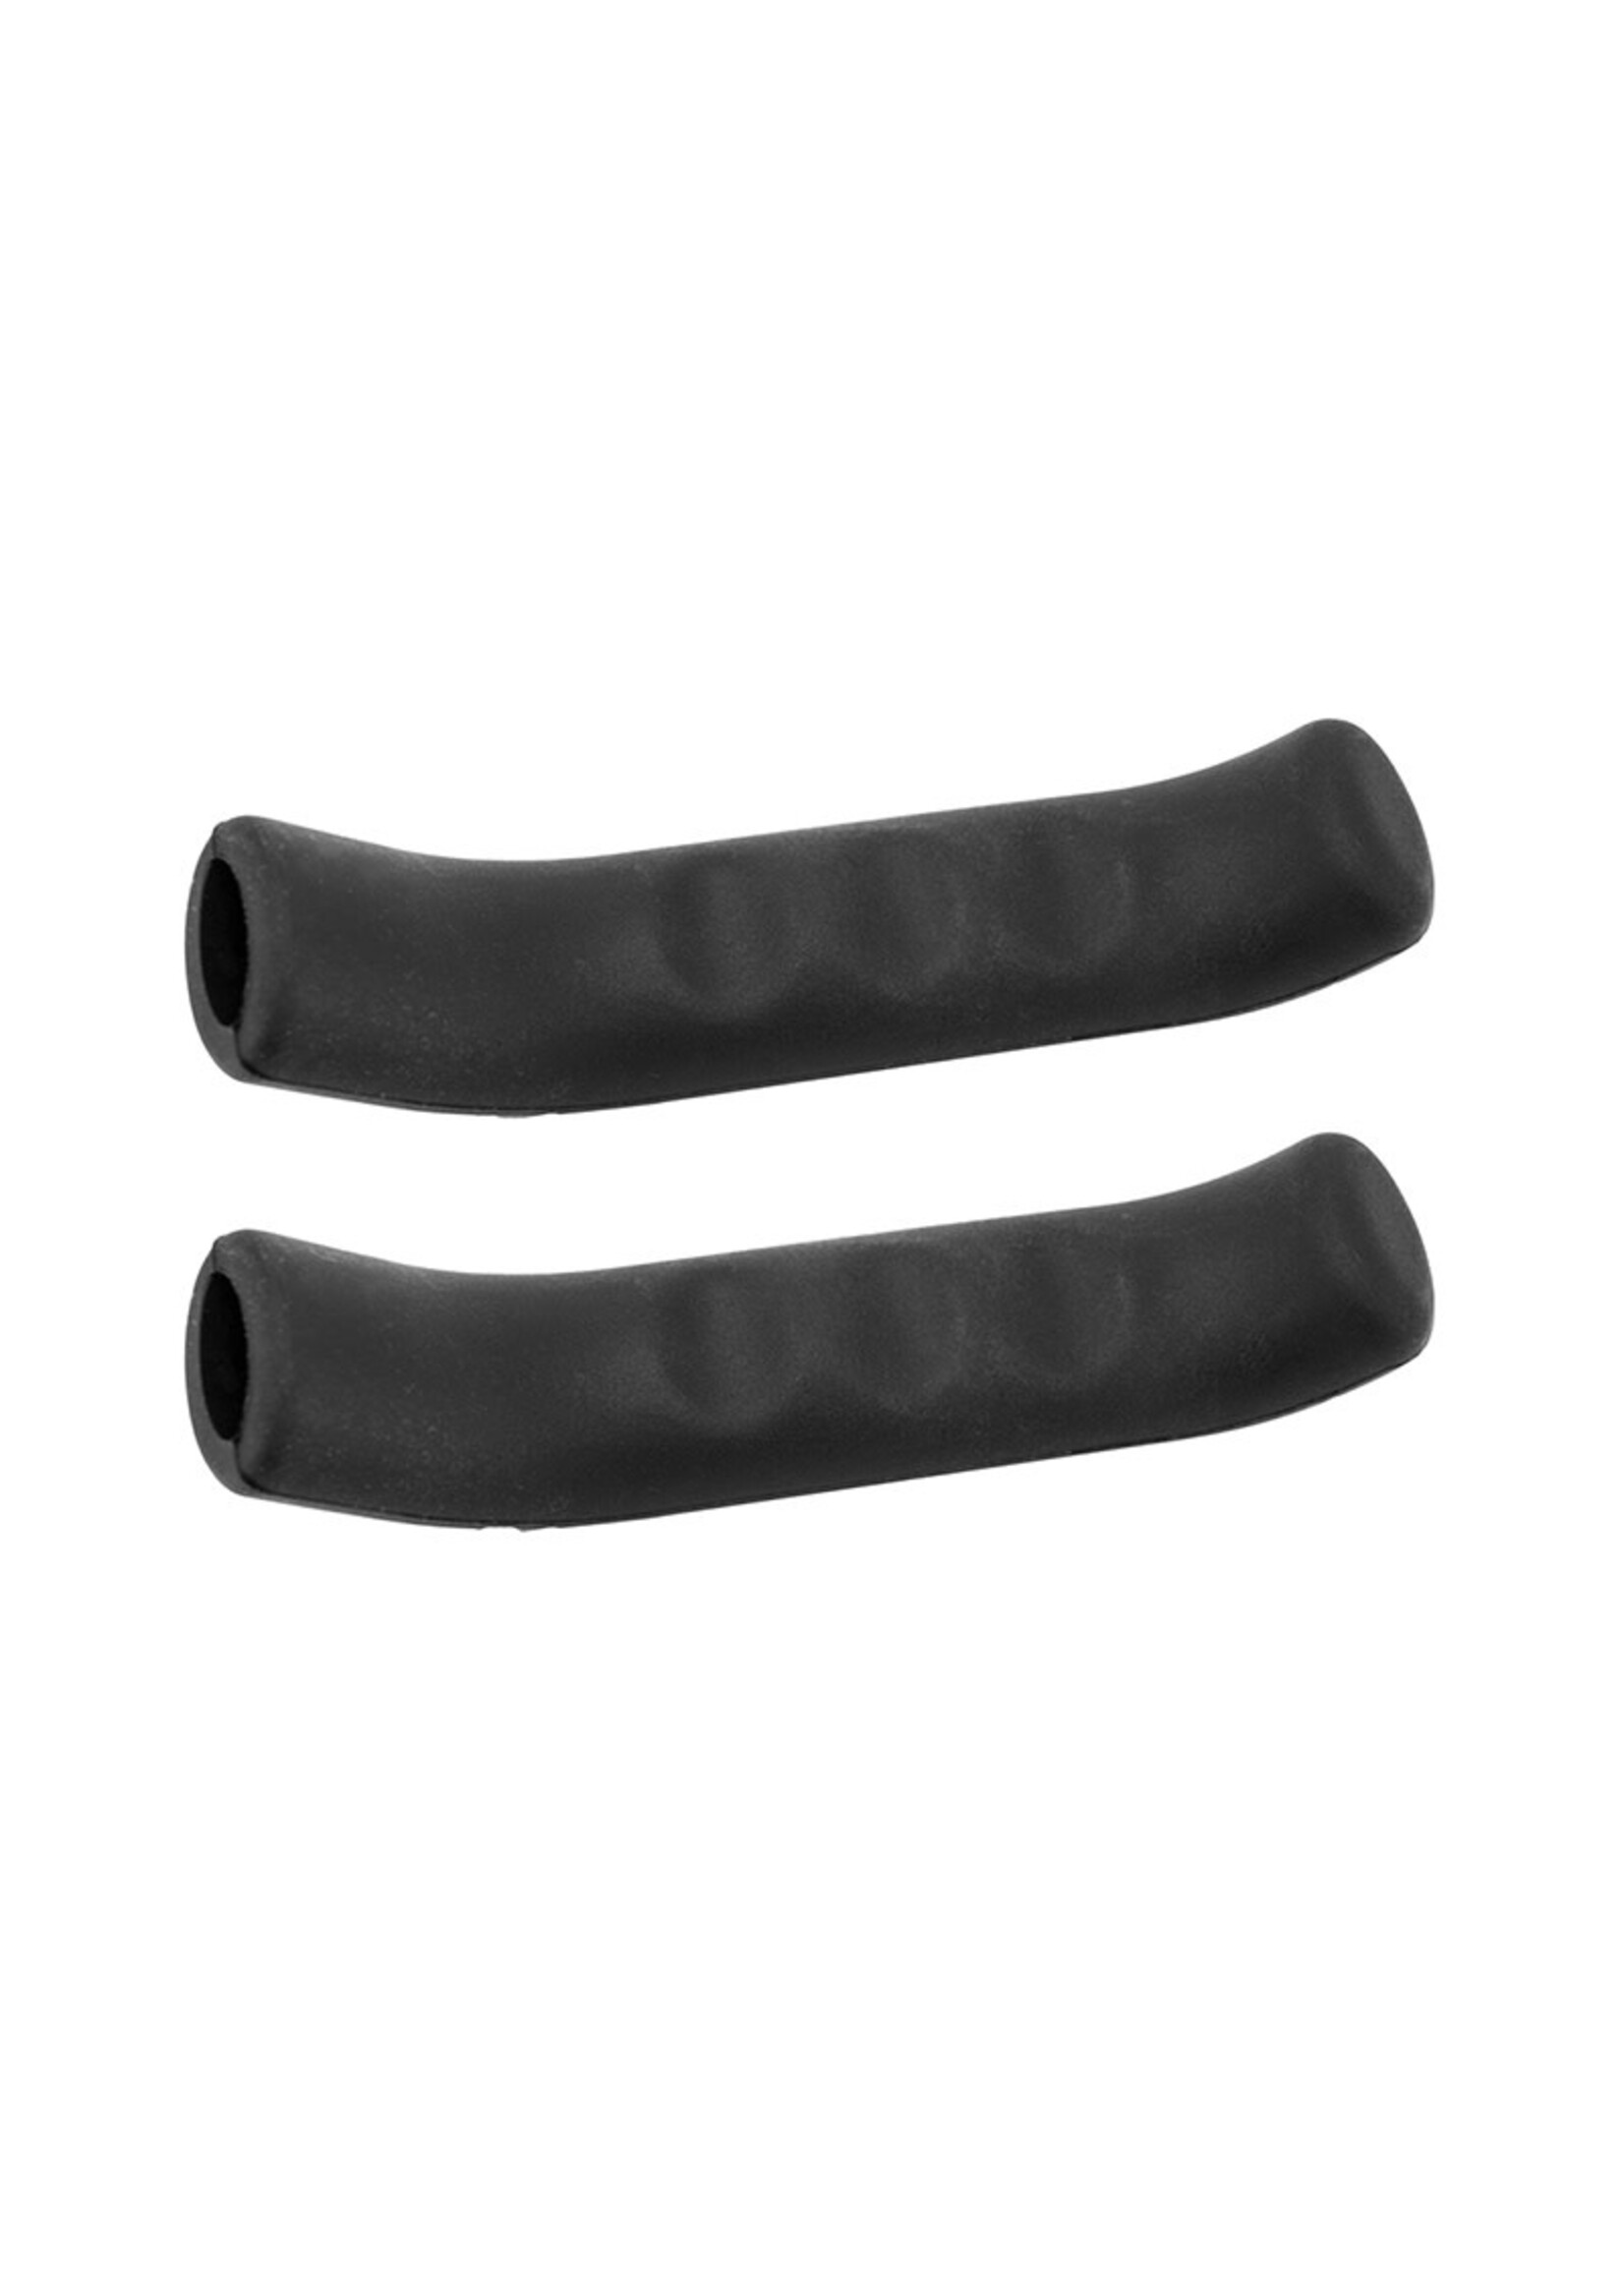 MILES WIDE GRIPS MILES WIDE BRAKE LEVER STICKY FINGERS 2.0 BK